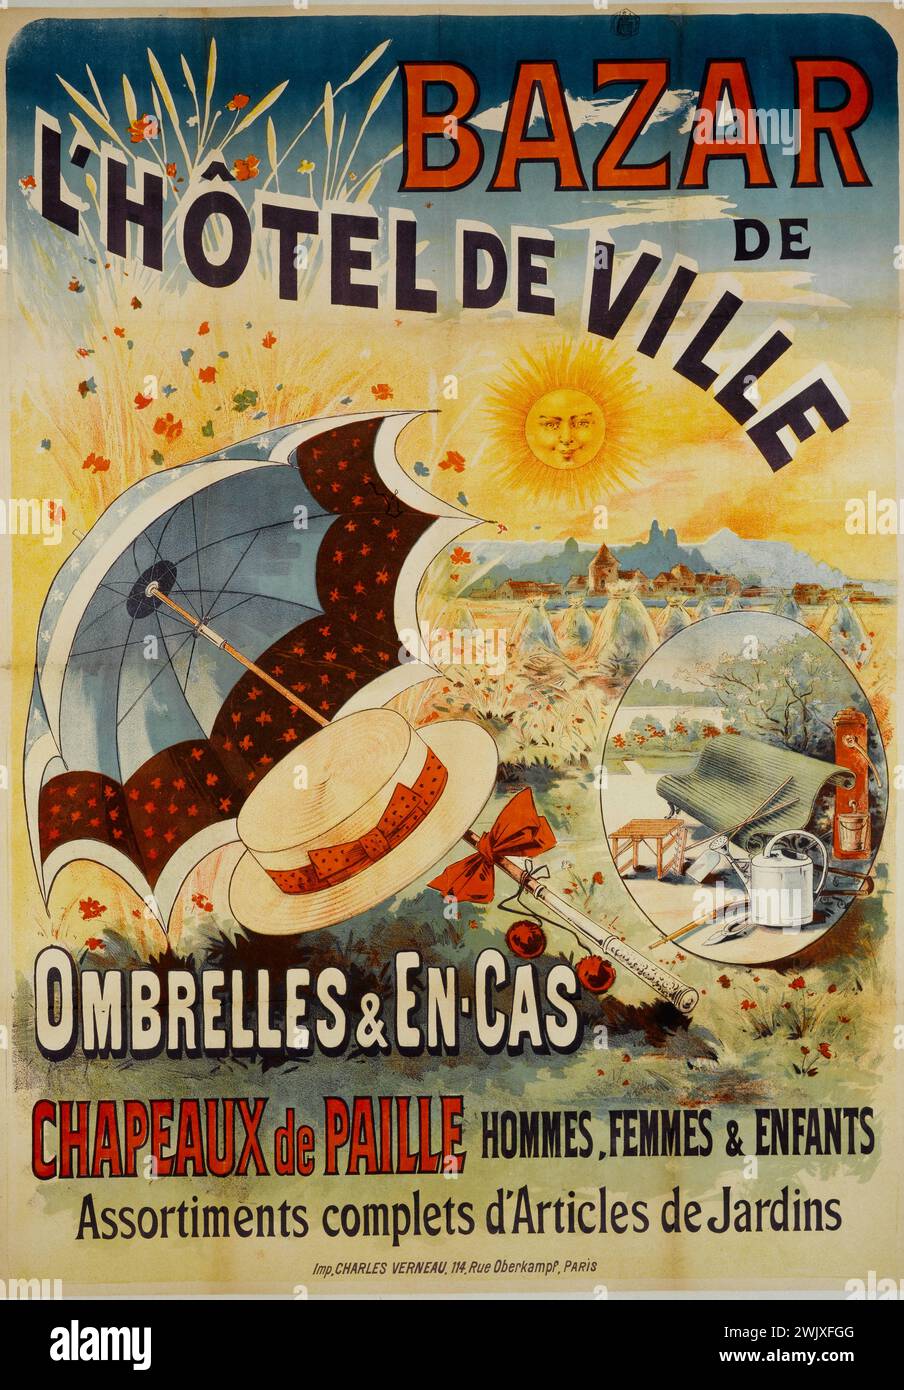 Charles Verneau printing house. 'Bazaar of the town hall, grays & snacks'. Poster. Color lithography. Paris, Carnavalet museum. Water canoeoir, Garden article, poster, city hotel bazaar, BHV, boater, snacks, color lithography, shadow, sun Stock Photo